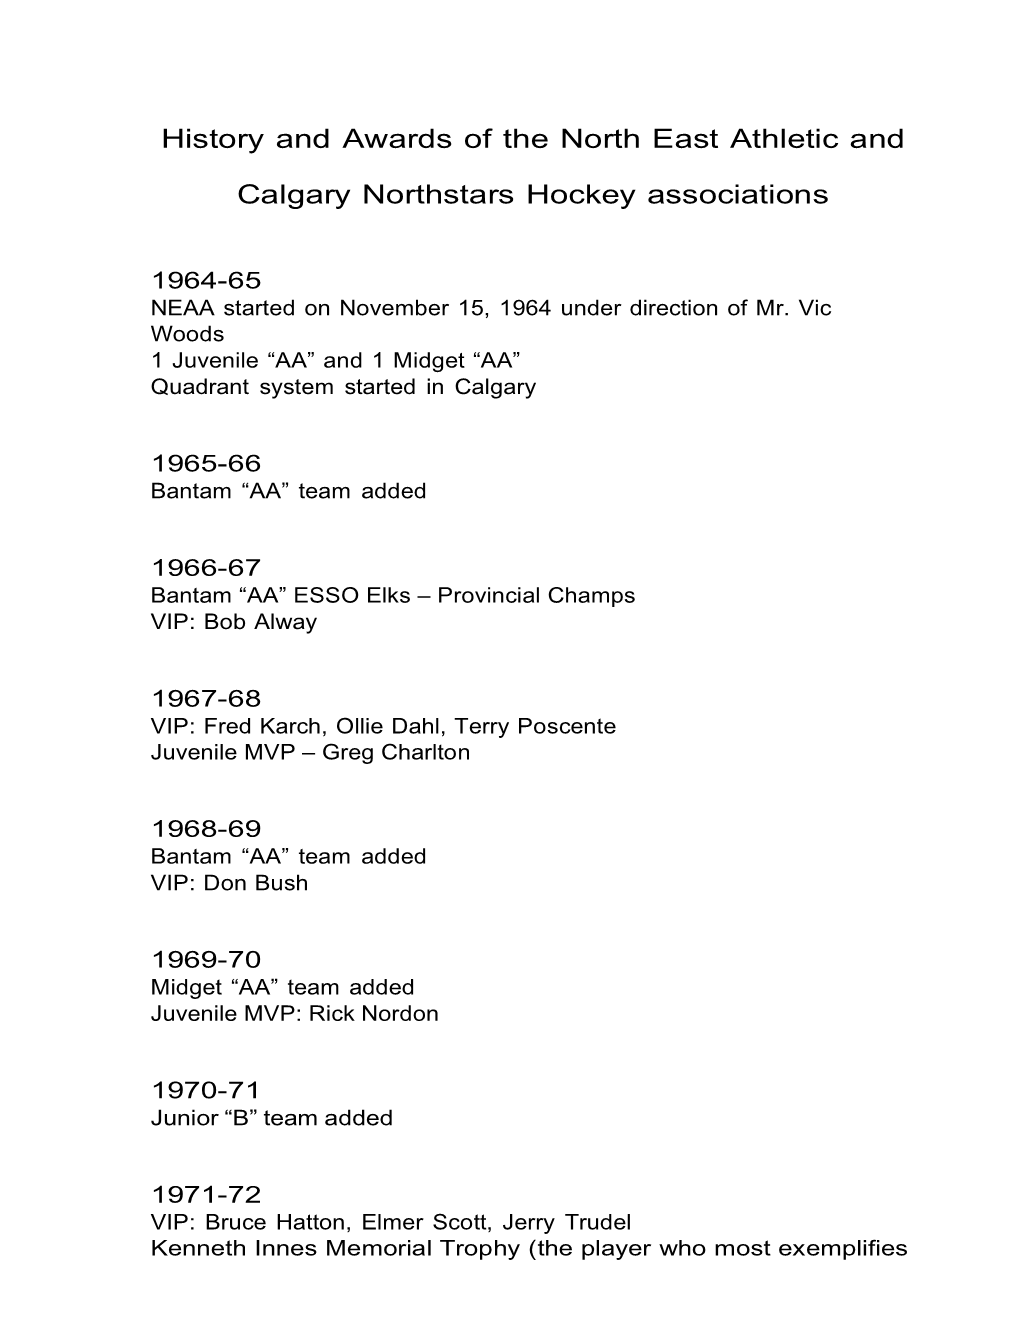 History and Awards of the North East Athletic and Calgary Northstars